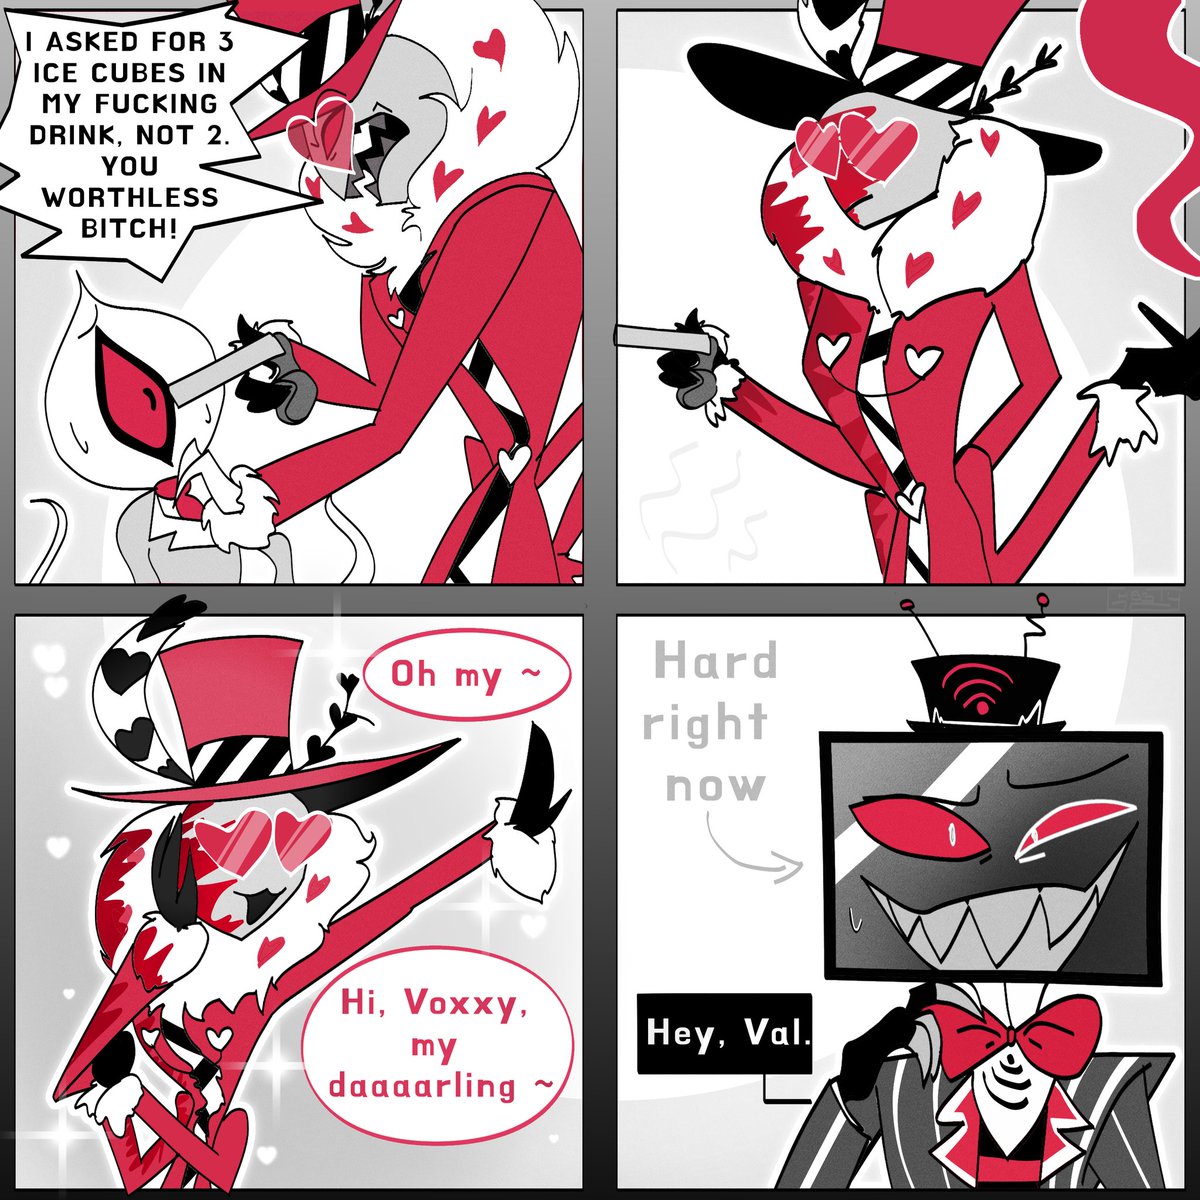 He into bad bitches 

#VoxVal #StaticMoth #HazbinHotel #HazbinHotelValentino #HazbinHotelVox